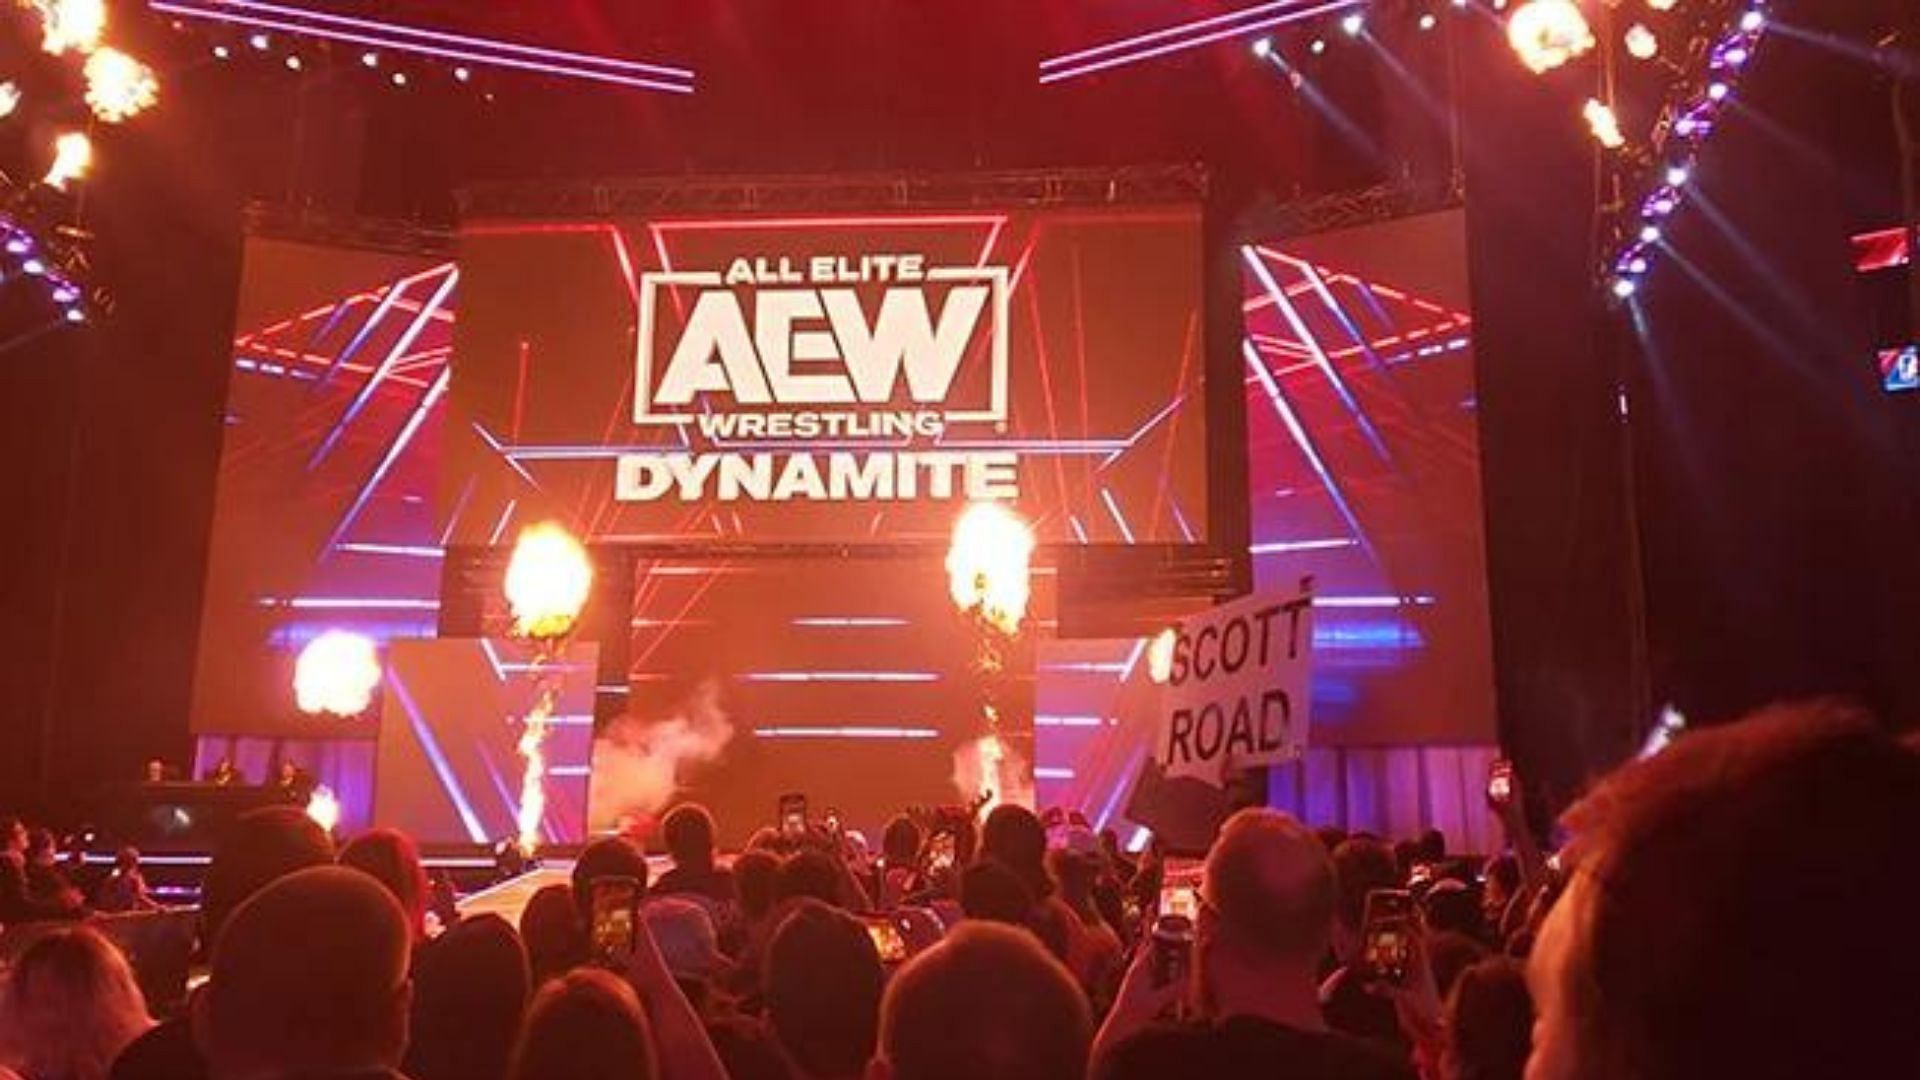 Tensions are once again building backstage in AEW